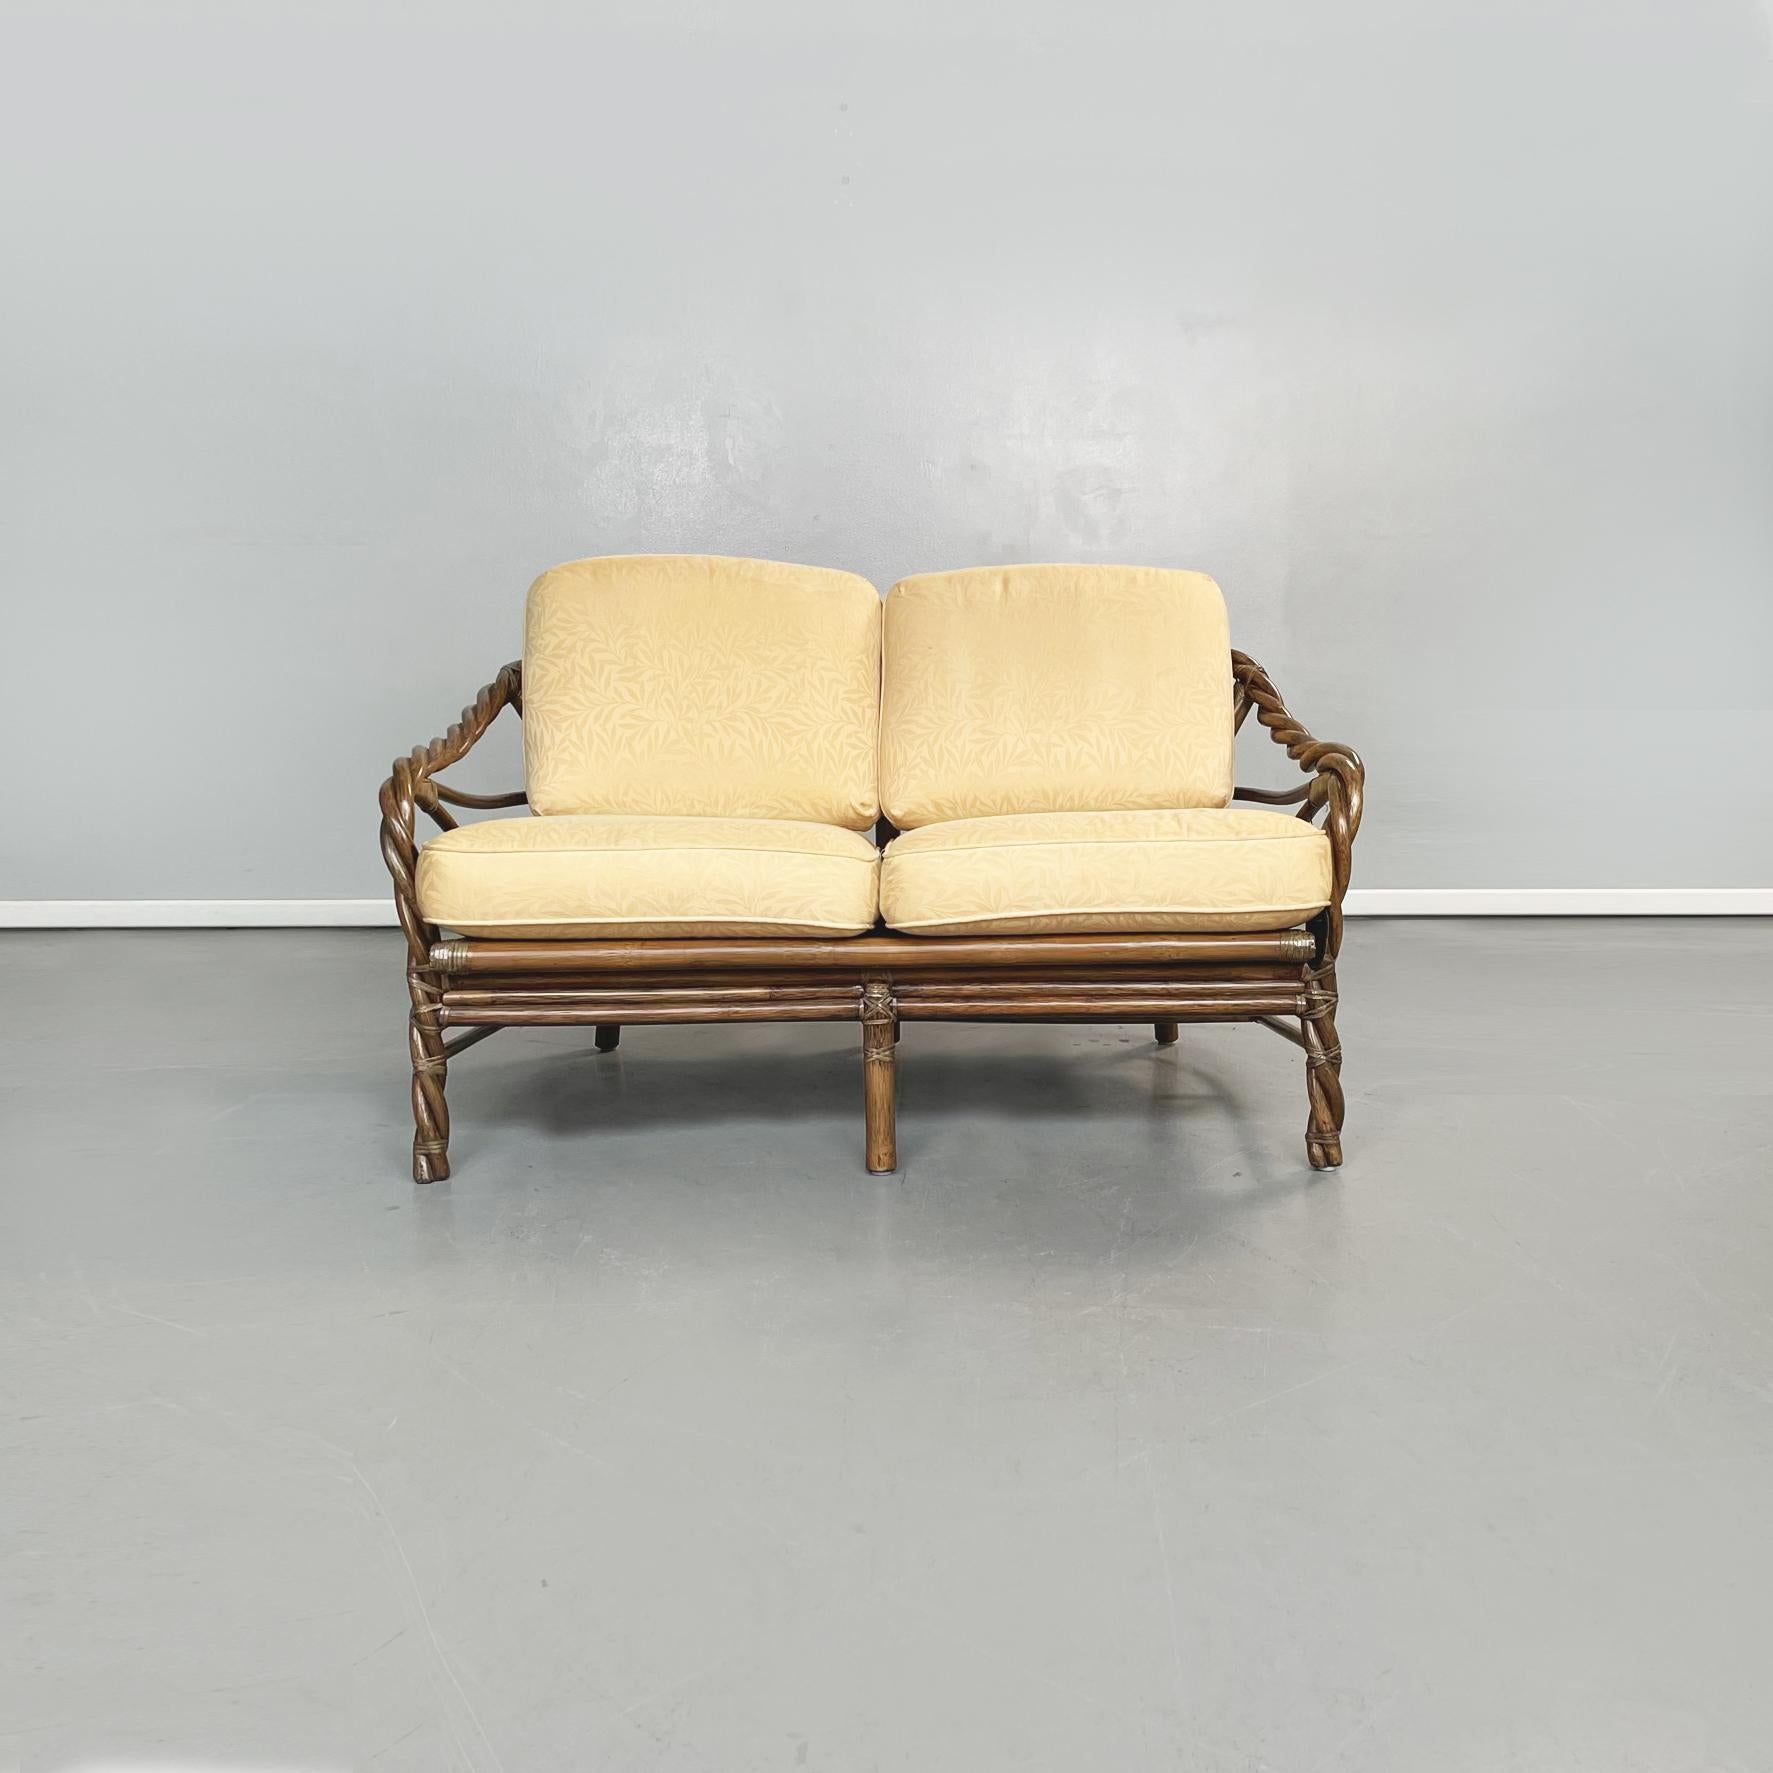 American mid-century Rattan and beige fabric sofa by McGuire Company, 1970s
Two seater sofa with rectangular seat in rattan. The structure is in rattan woven with leather laces. On the seat, as on the back, there are two padded cushions covered in